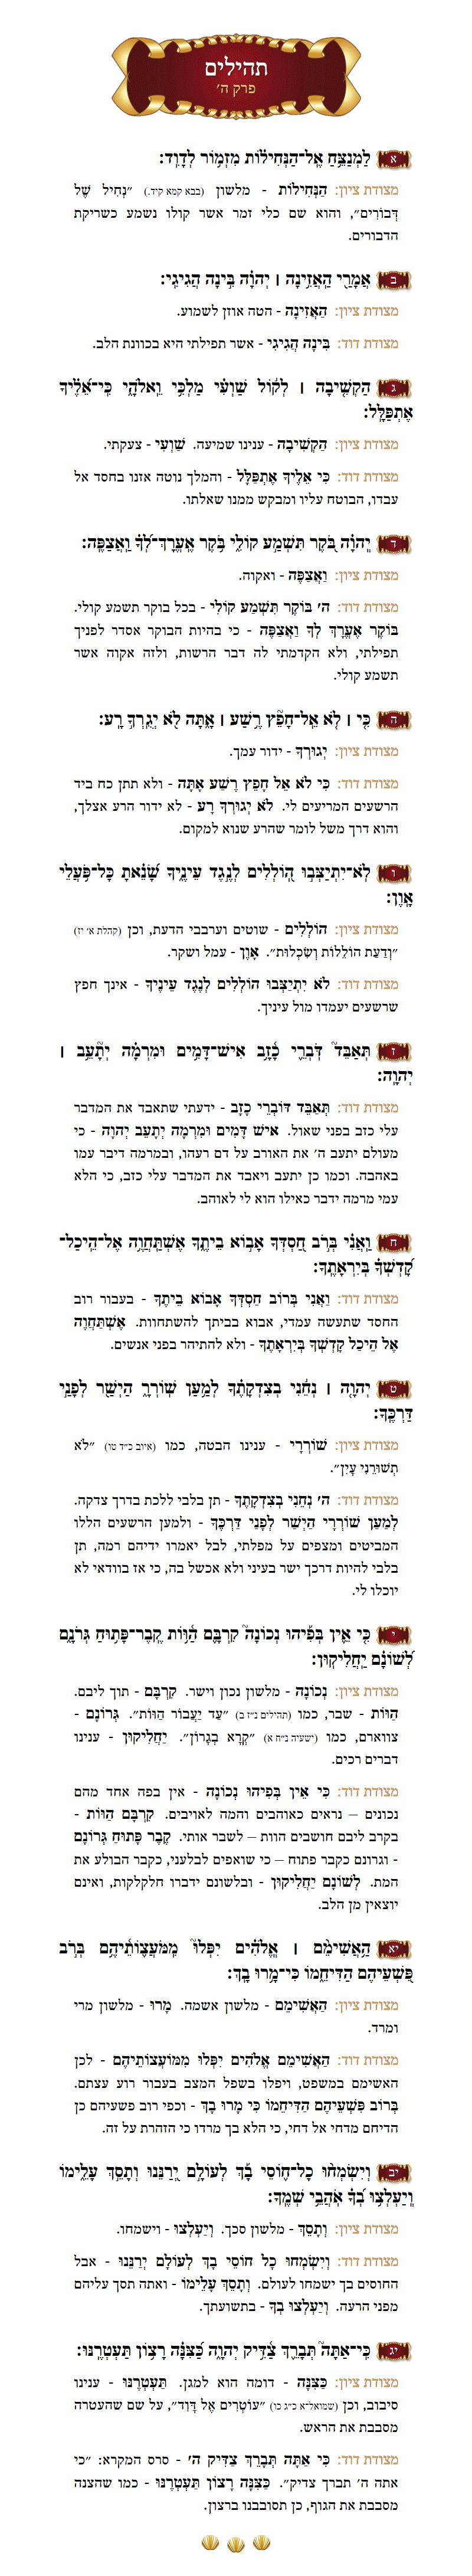 Sefer Tehillim Chapter 50 with commentary